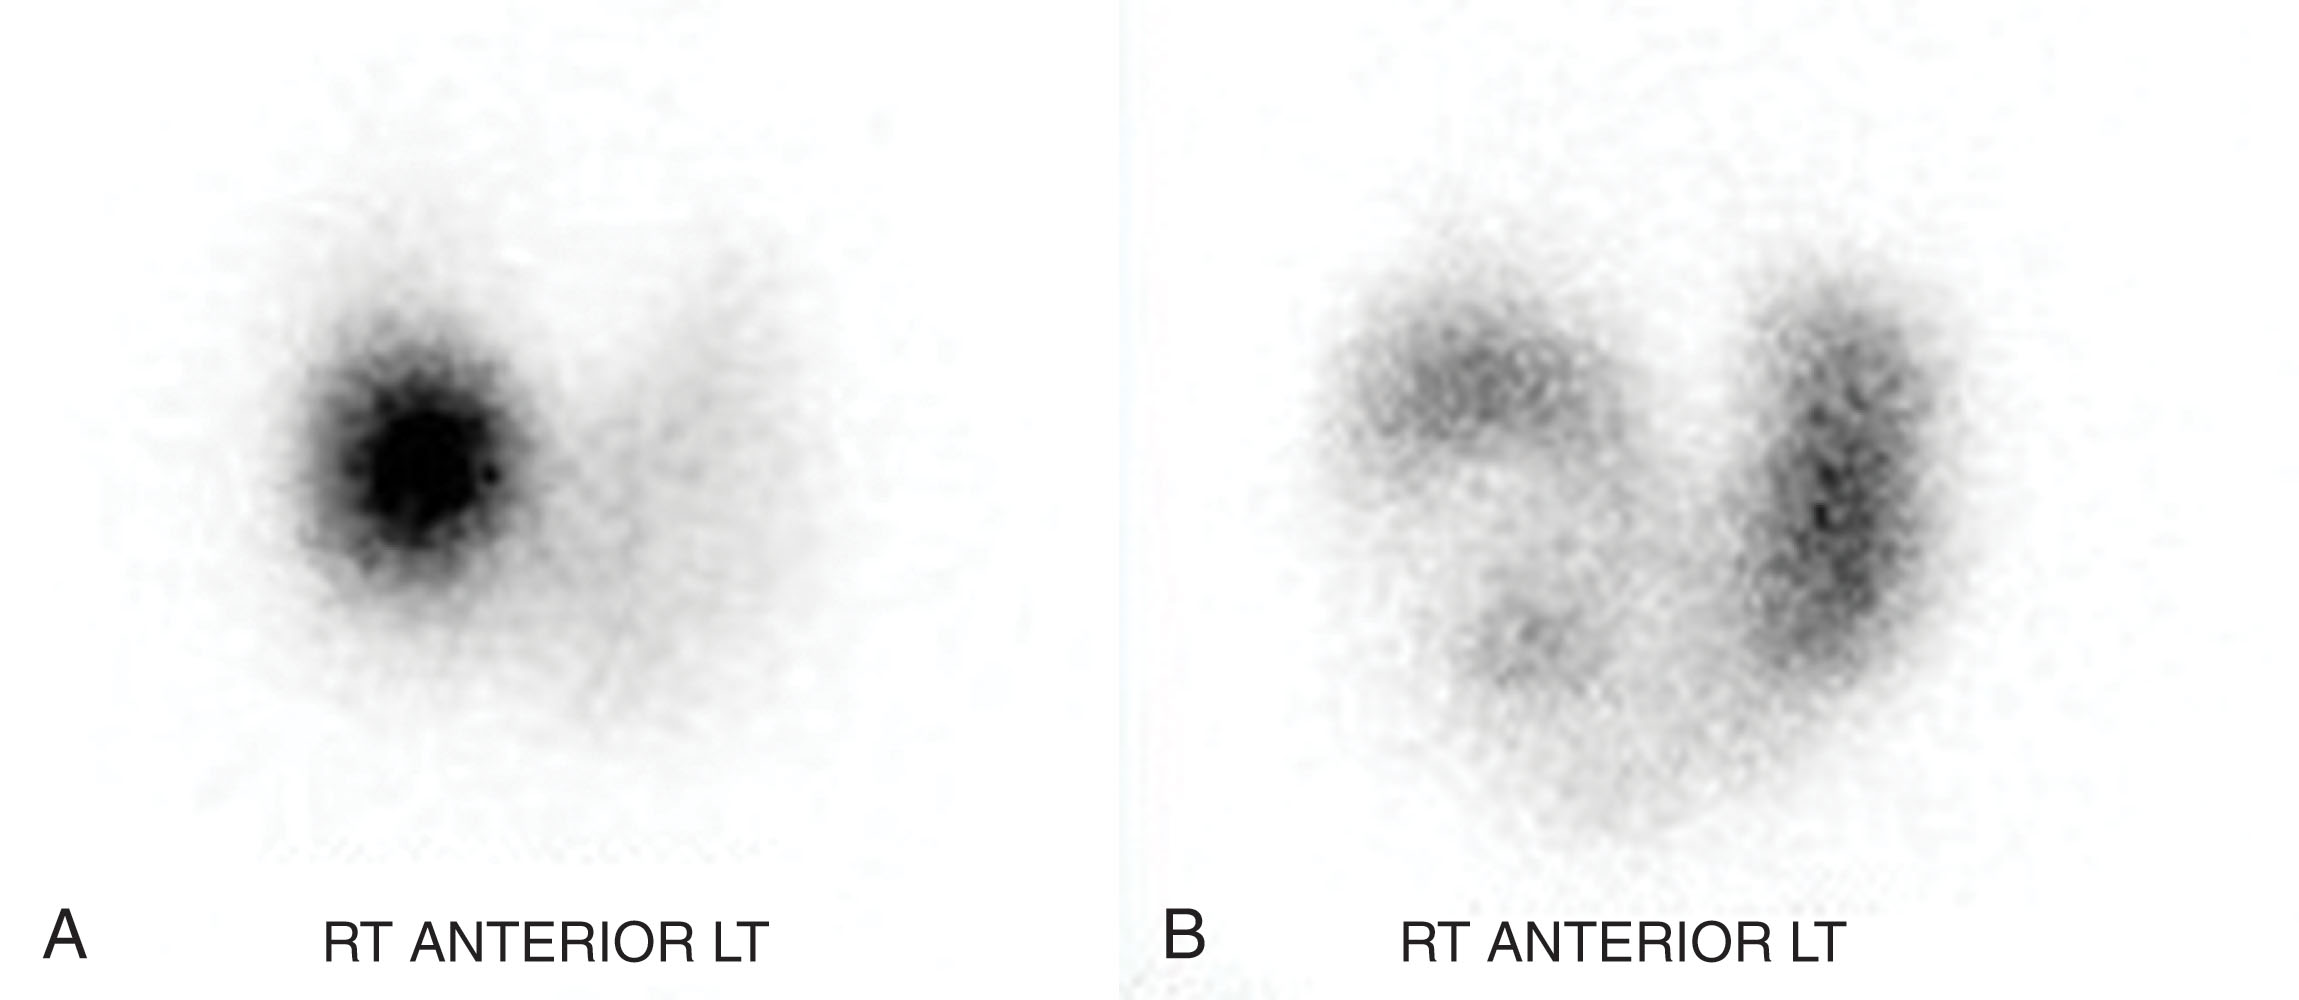 Fig. 22.2, (A) Scintigraphy of the thyroid gland demonstrating a “hot” nodule. (B) Scintigraphy of the thyroid demonstrating a “cold” nodule.